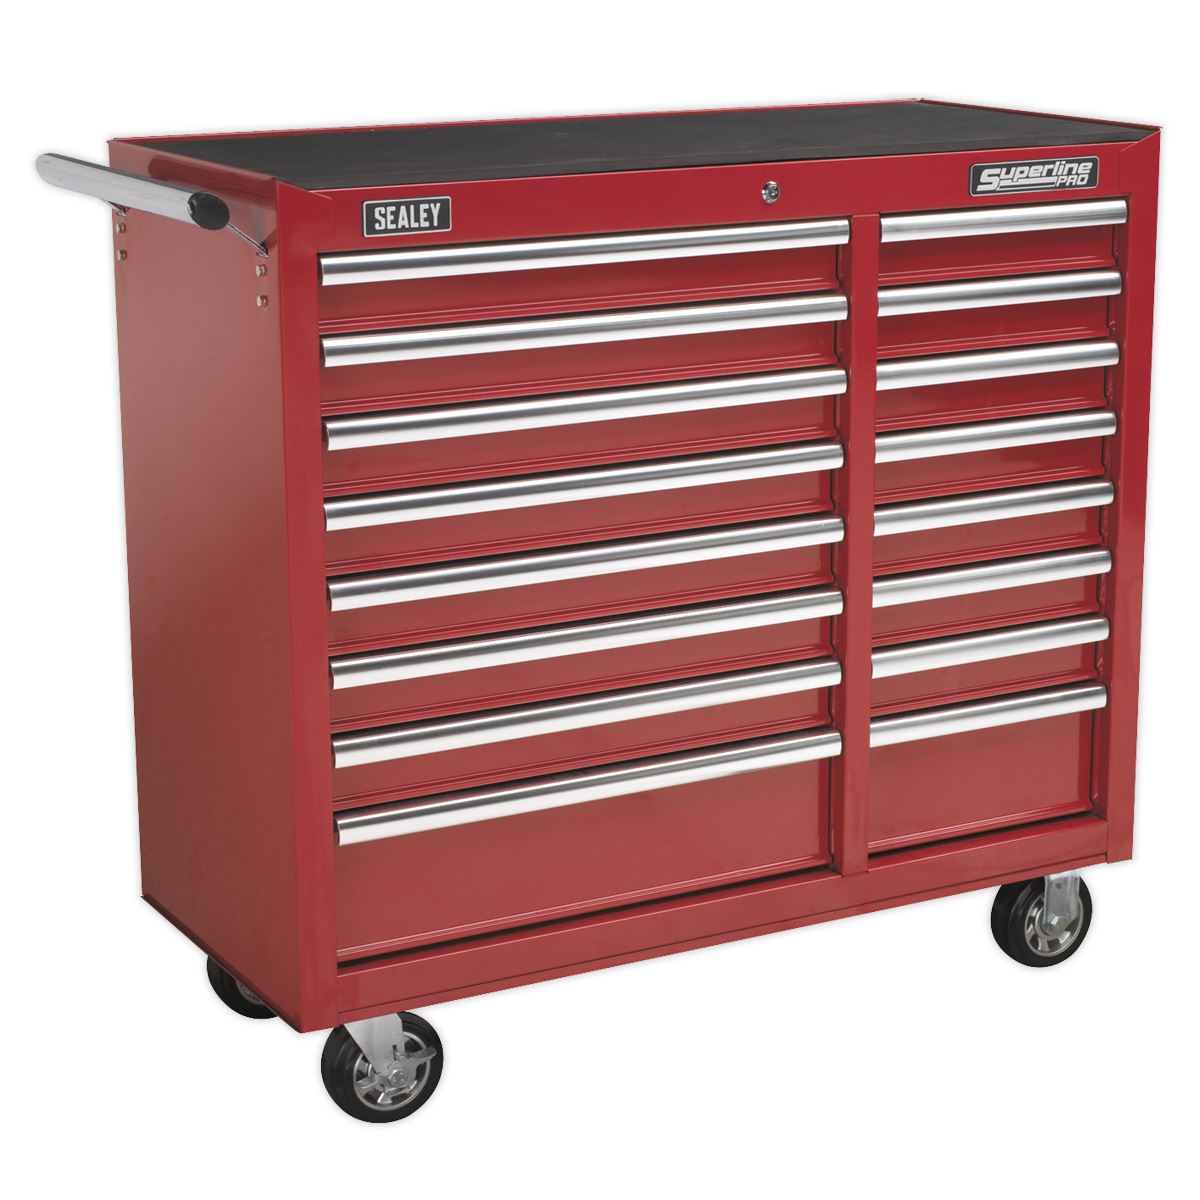 Sealey Superline Pro Rollcab 16 Drawer with Ball-Bearing Slides Heavy-Duty - Red